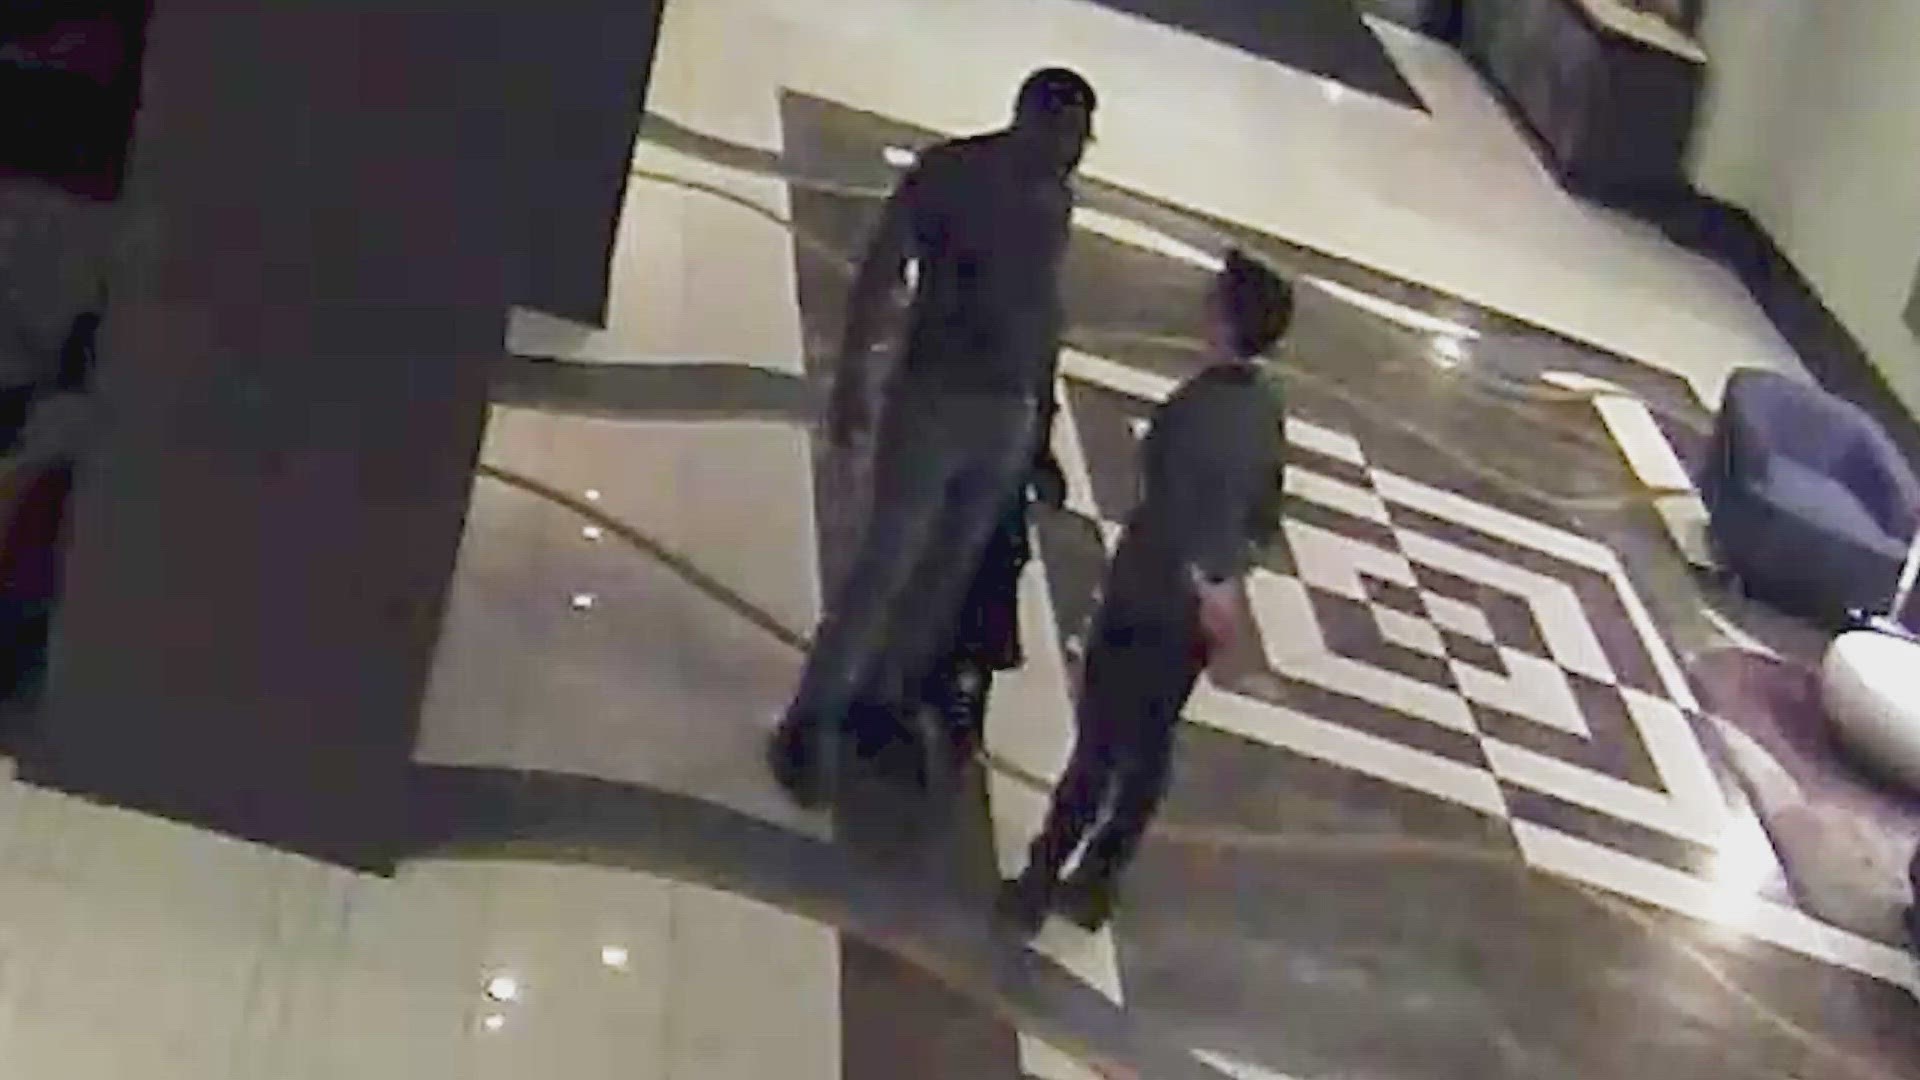 Michael Irvin Releases Hotel Video Saying It Shows He Did Nothing Wrong